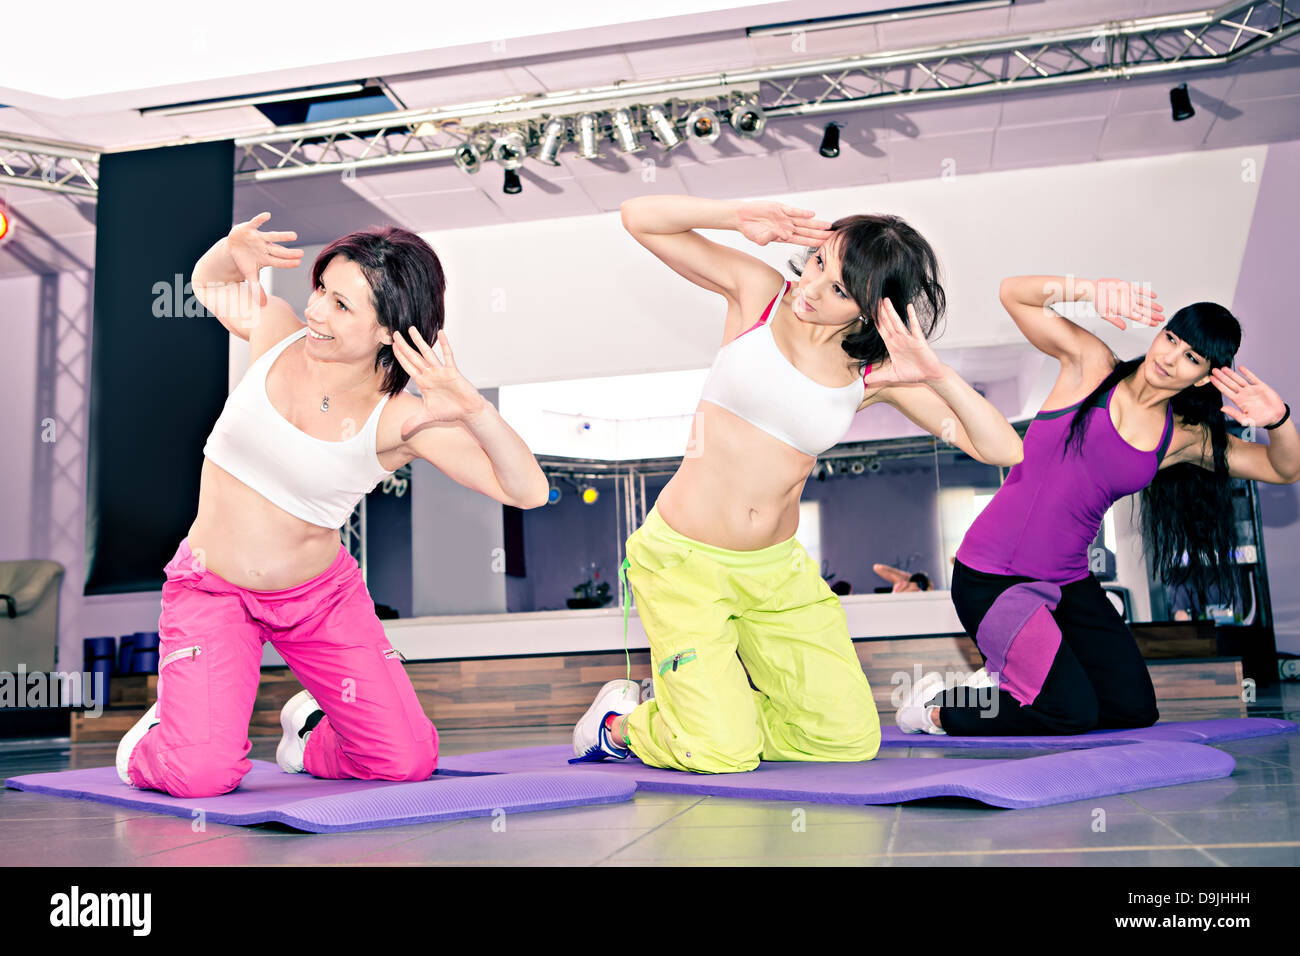 young women in sport dress at an aerobic and zumba exercise Stock Photo